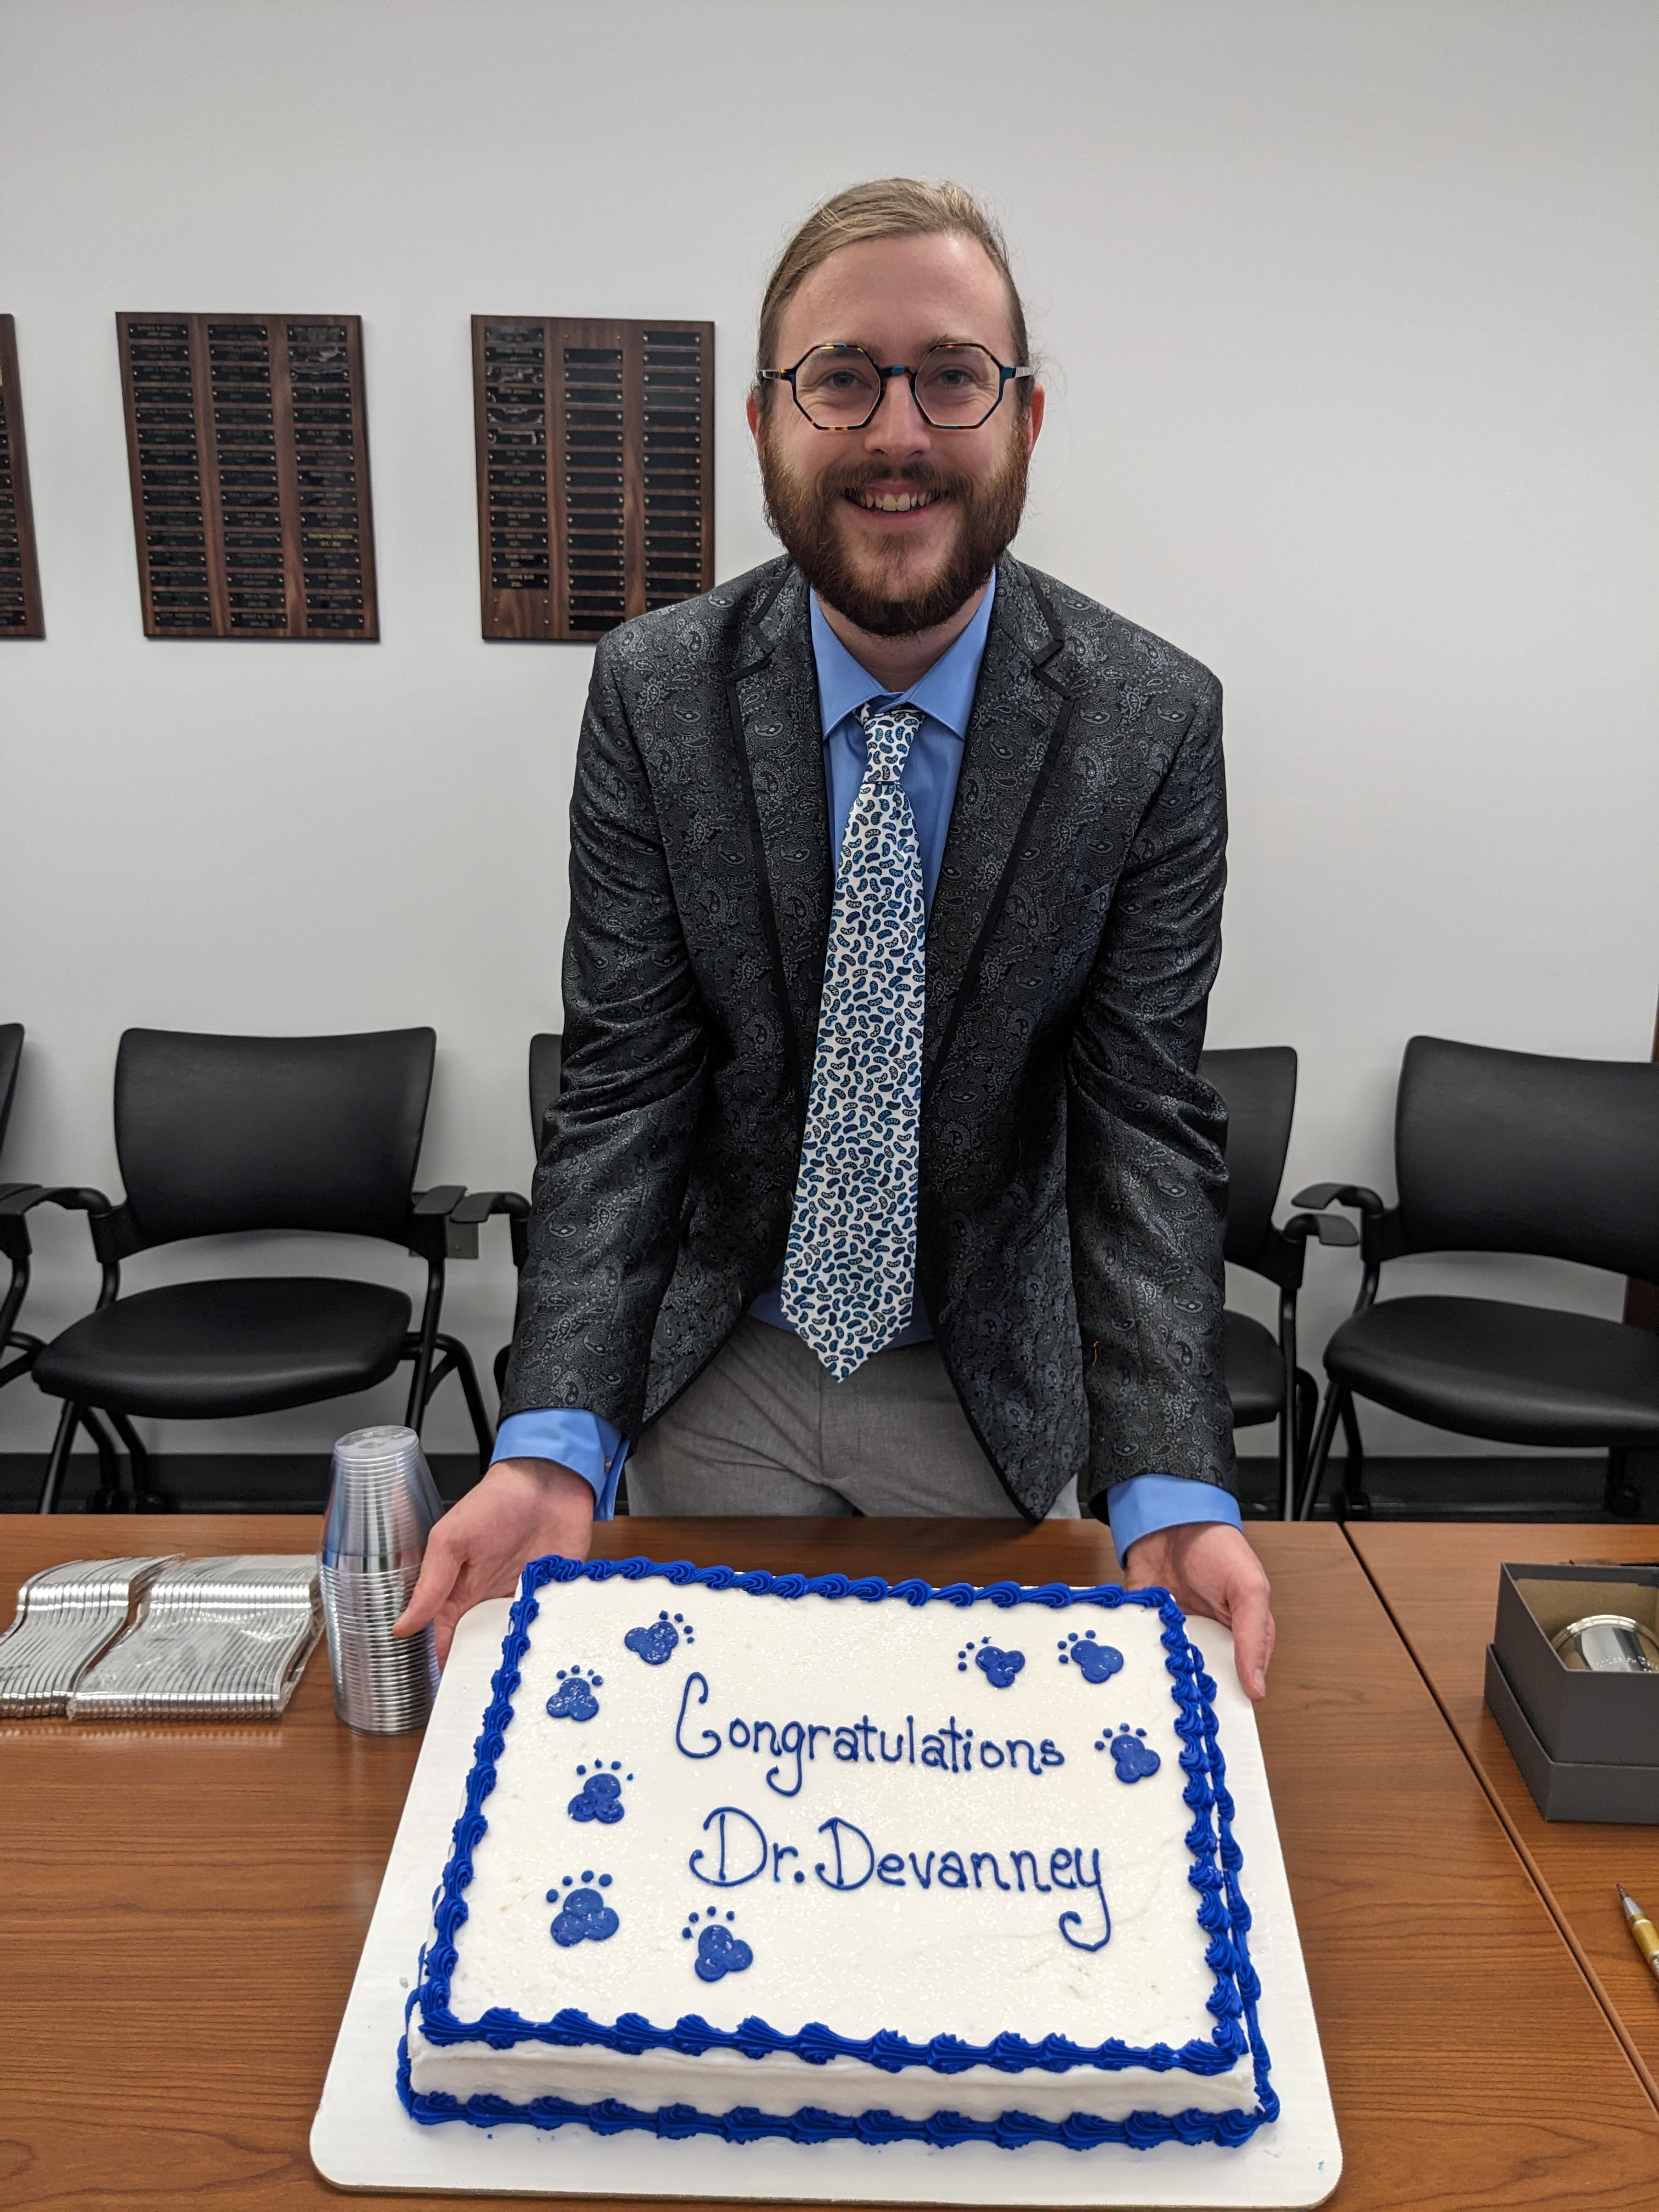 Picture of Dr Devanney holding a cake that says, "Congratulations Dr. Devanney".